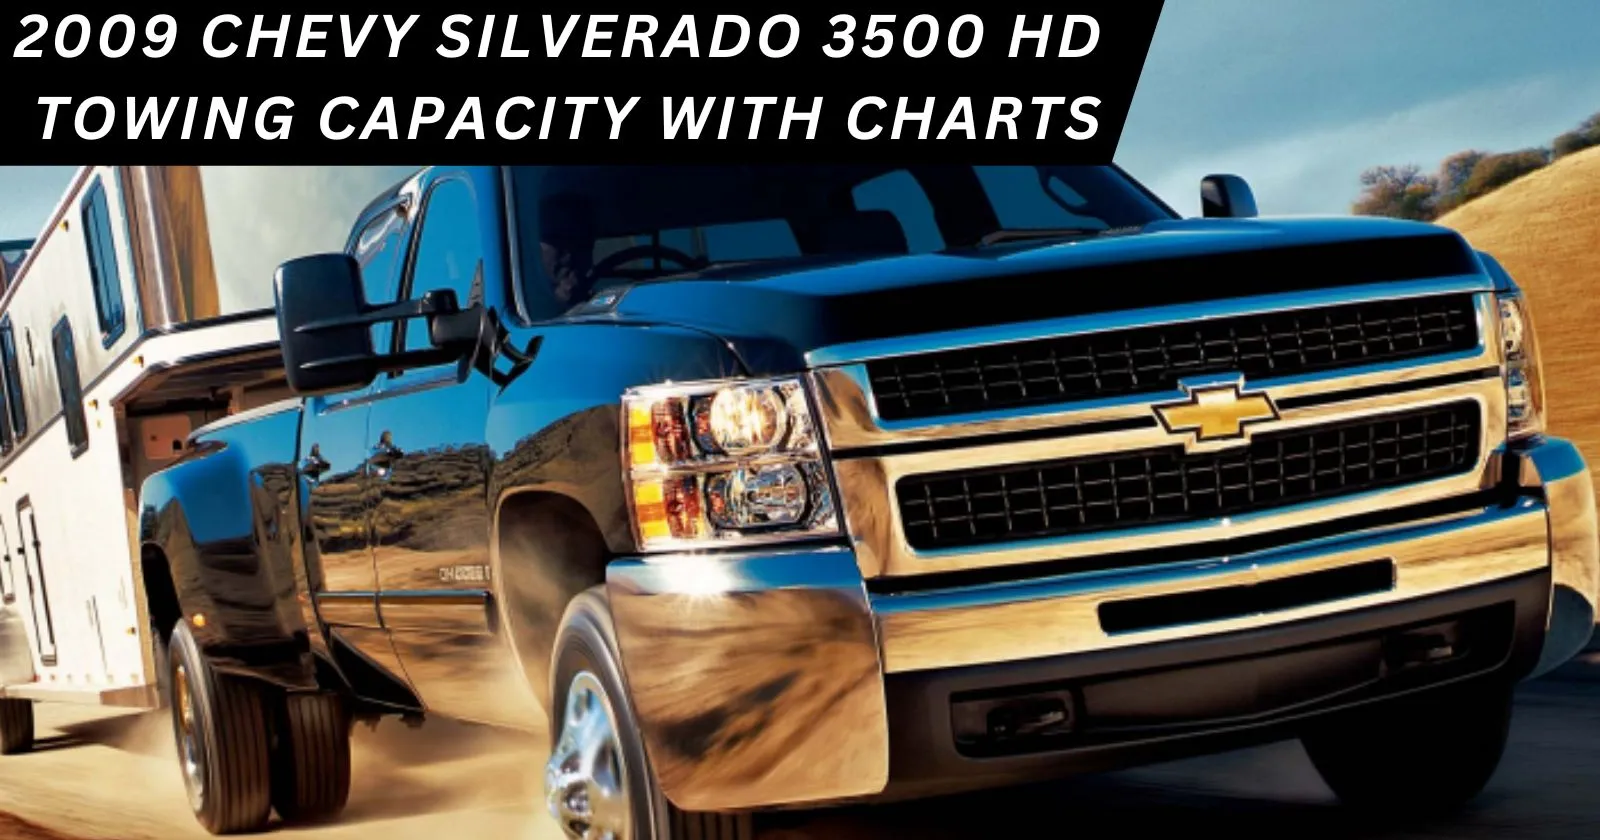 Explore the 2009 Chevy Silverado 3500 HD Towing Capacity with Charts.